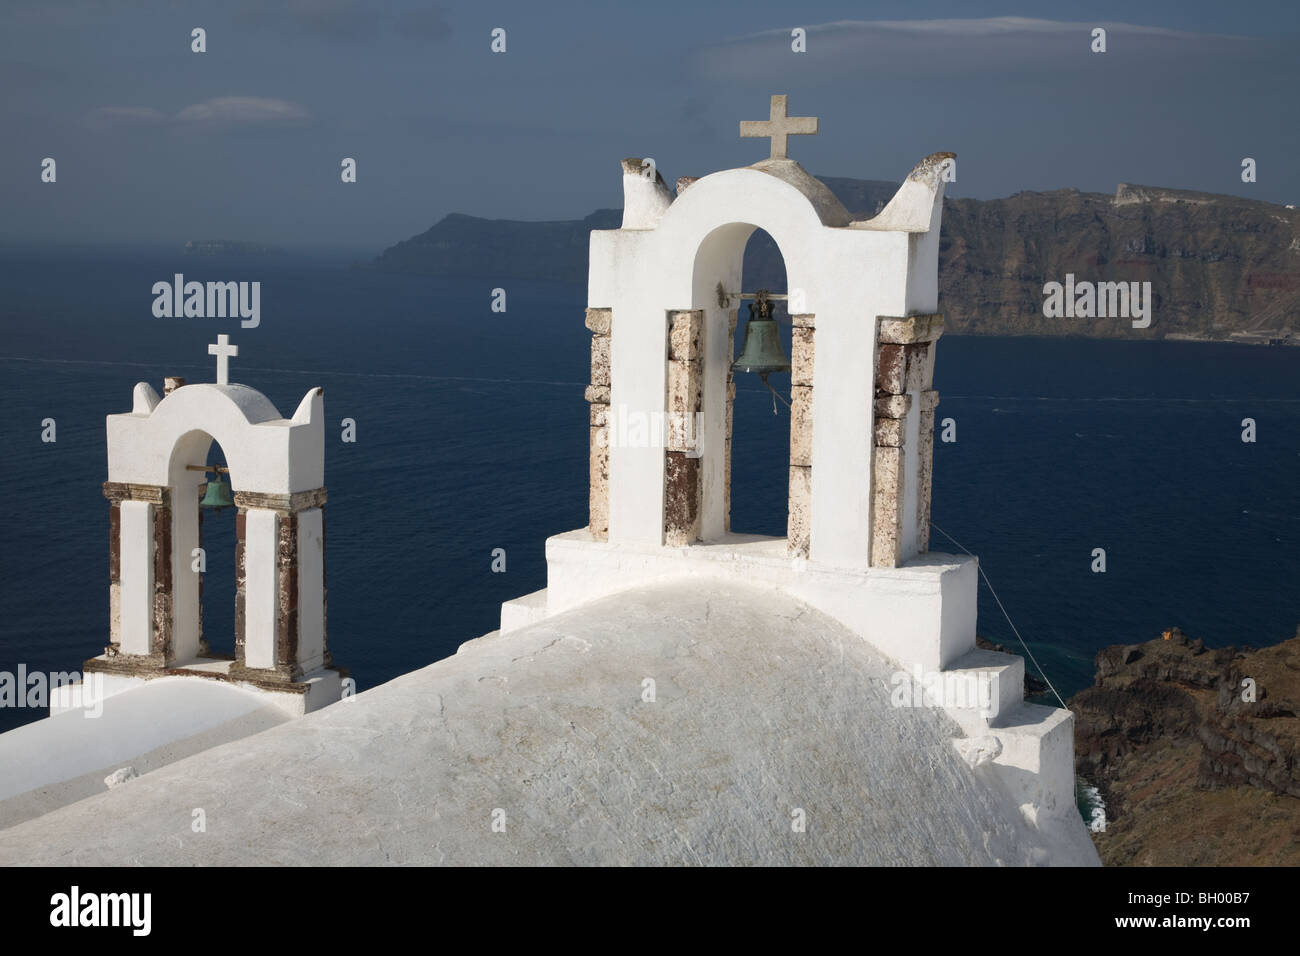 Church bell towers overlooking Santorini's caldera and lagoon in the Greek islands Stock Photo